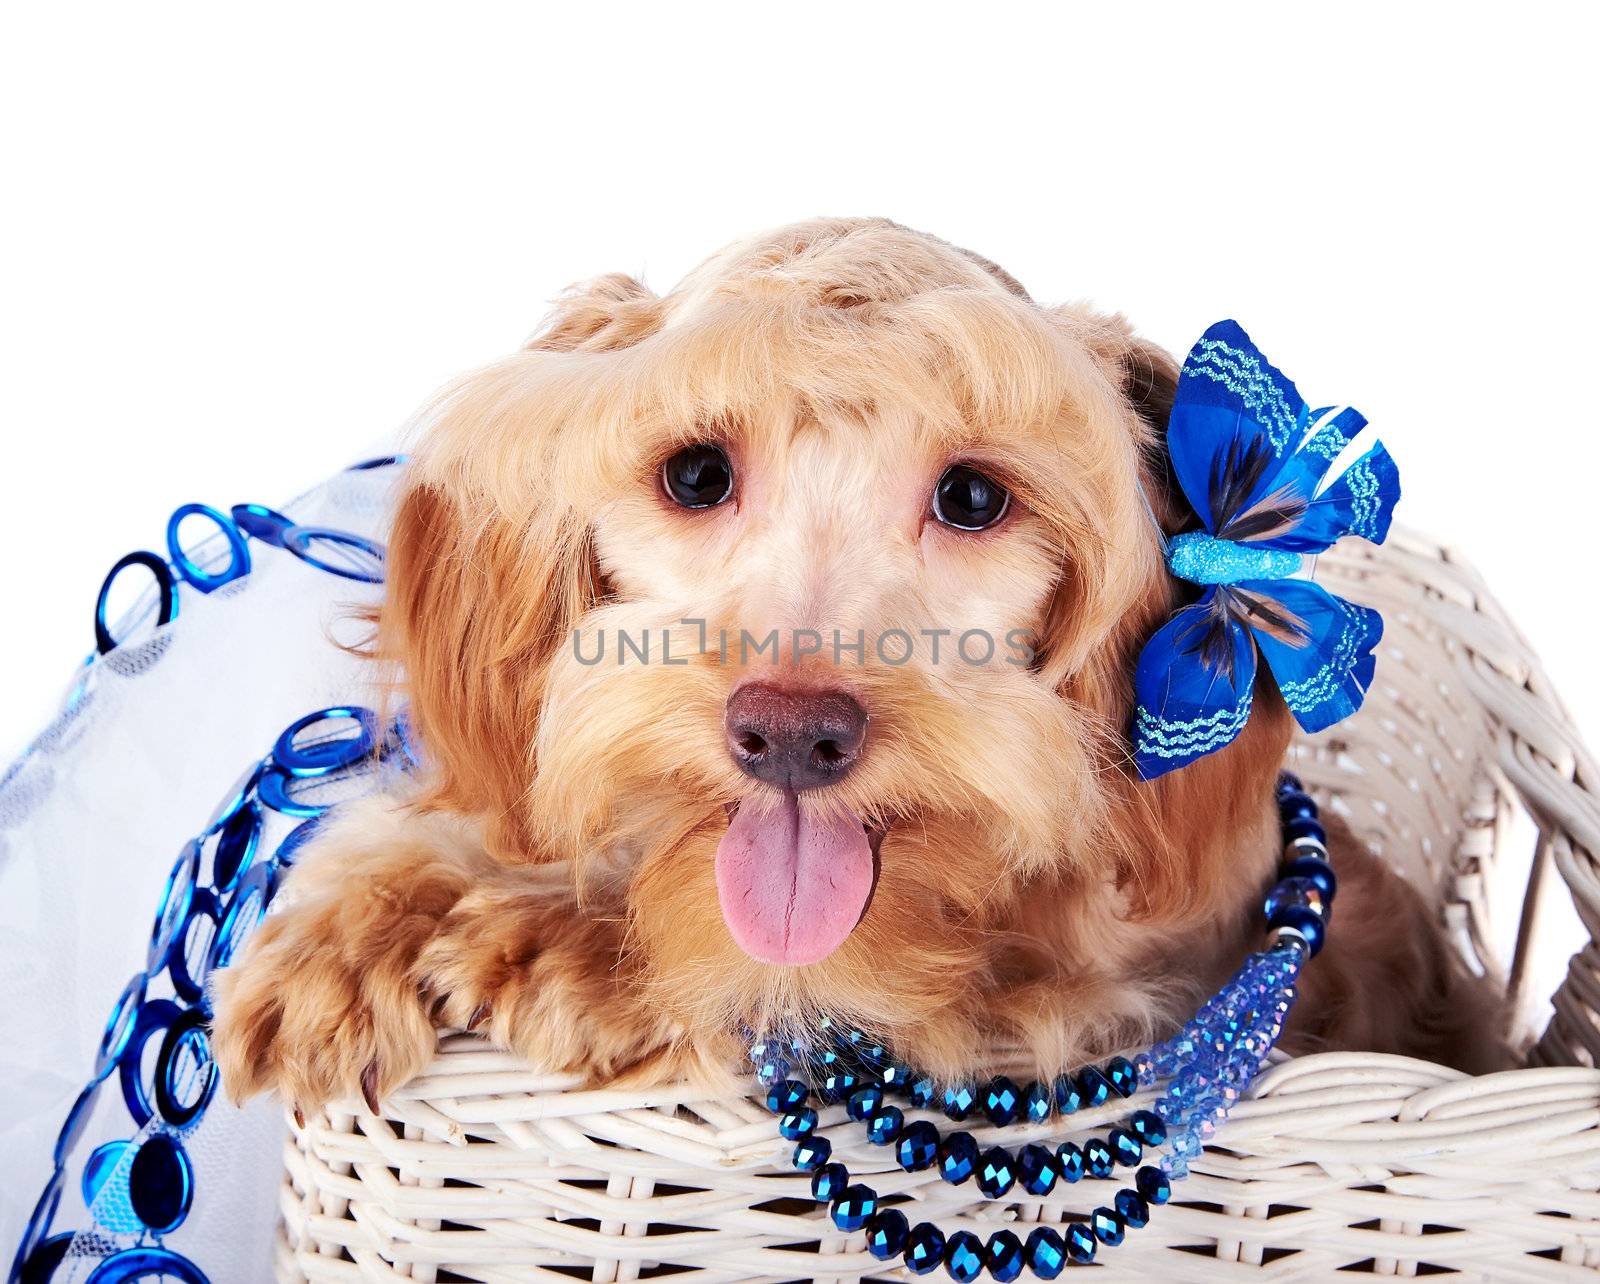 Decorative dog. Puppy of the Petersburg orchid on a white background.  Shaggy doggie.  Decorative thoroughbred dog. Red dog. Dog in a basket.